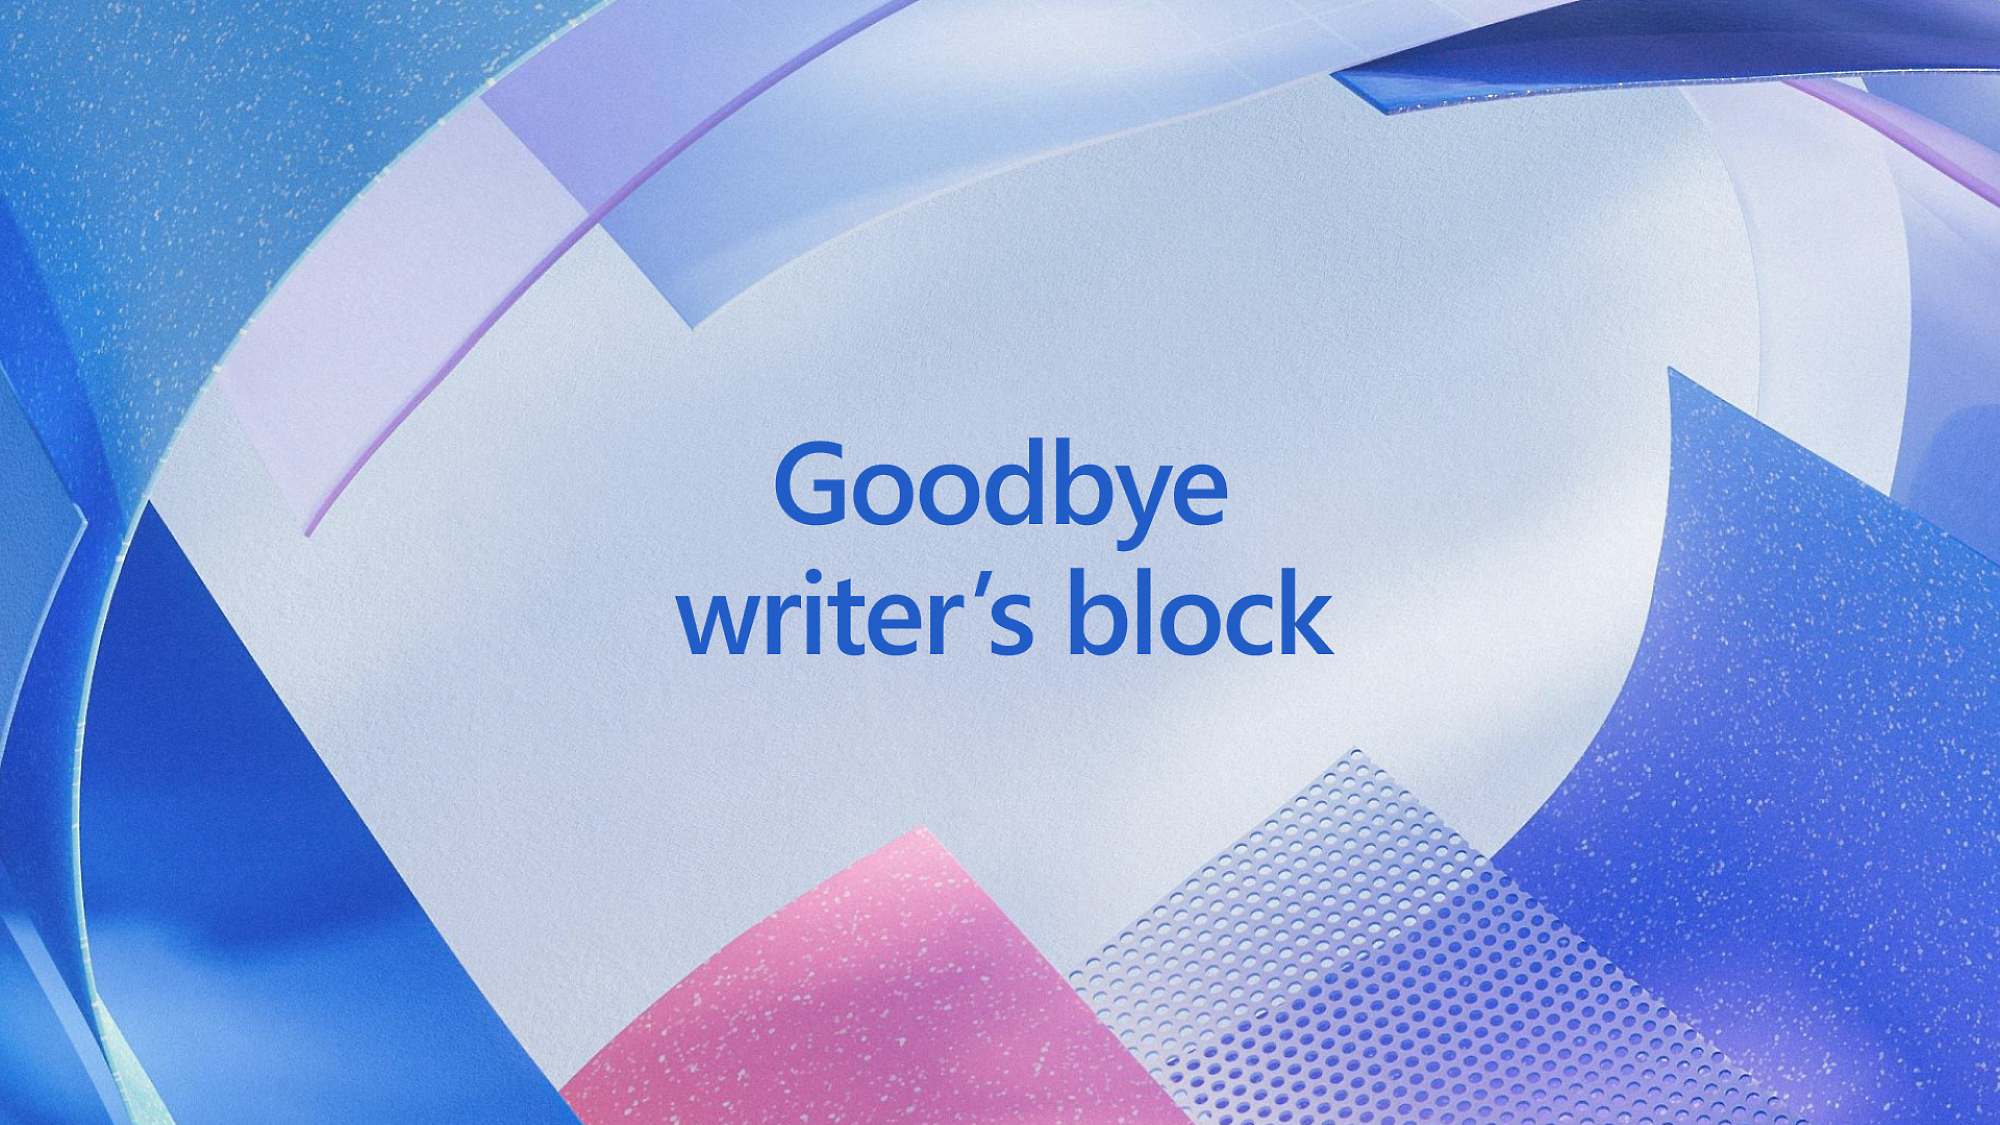 Abstract graphic of blue and pink curved shapes with the text "goodbye writer’s block" in the center.